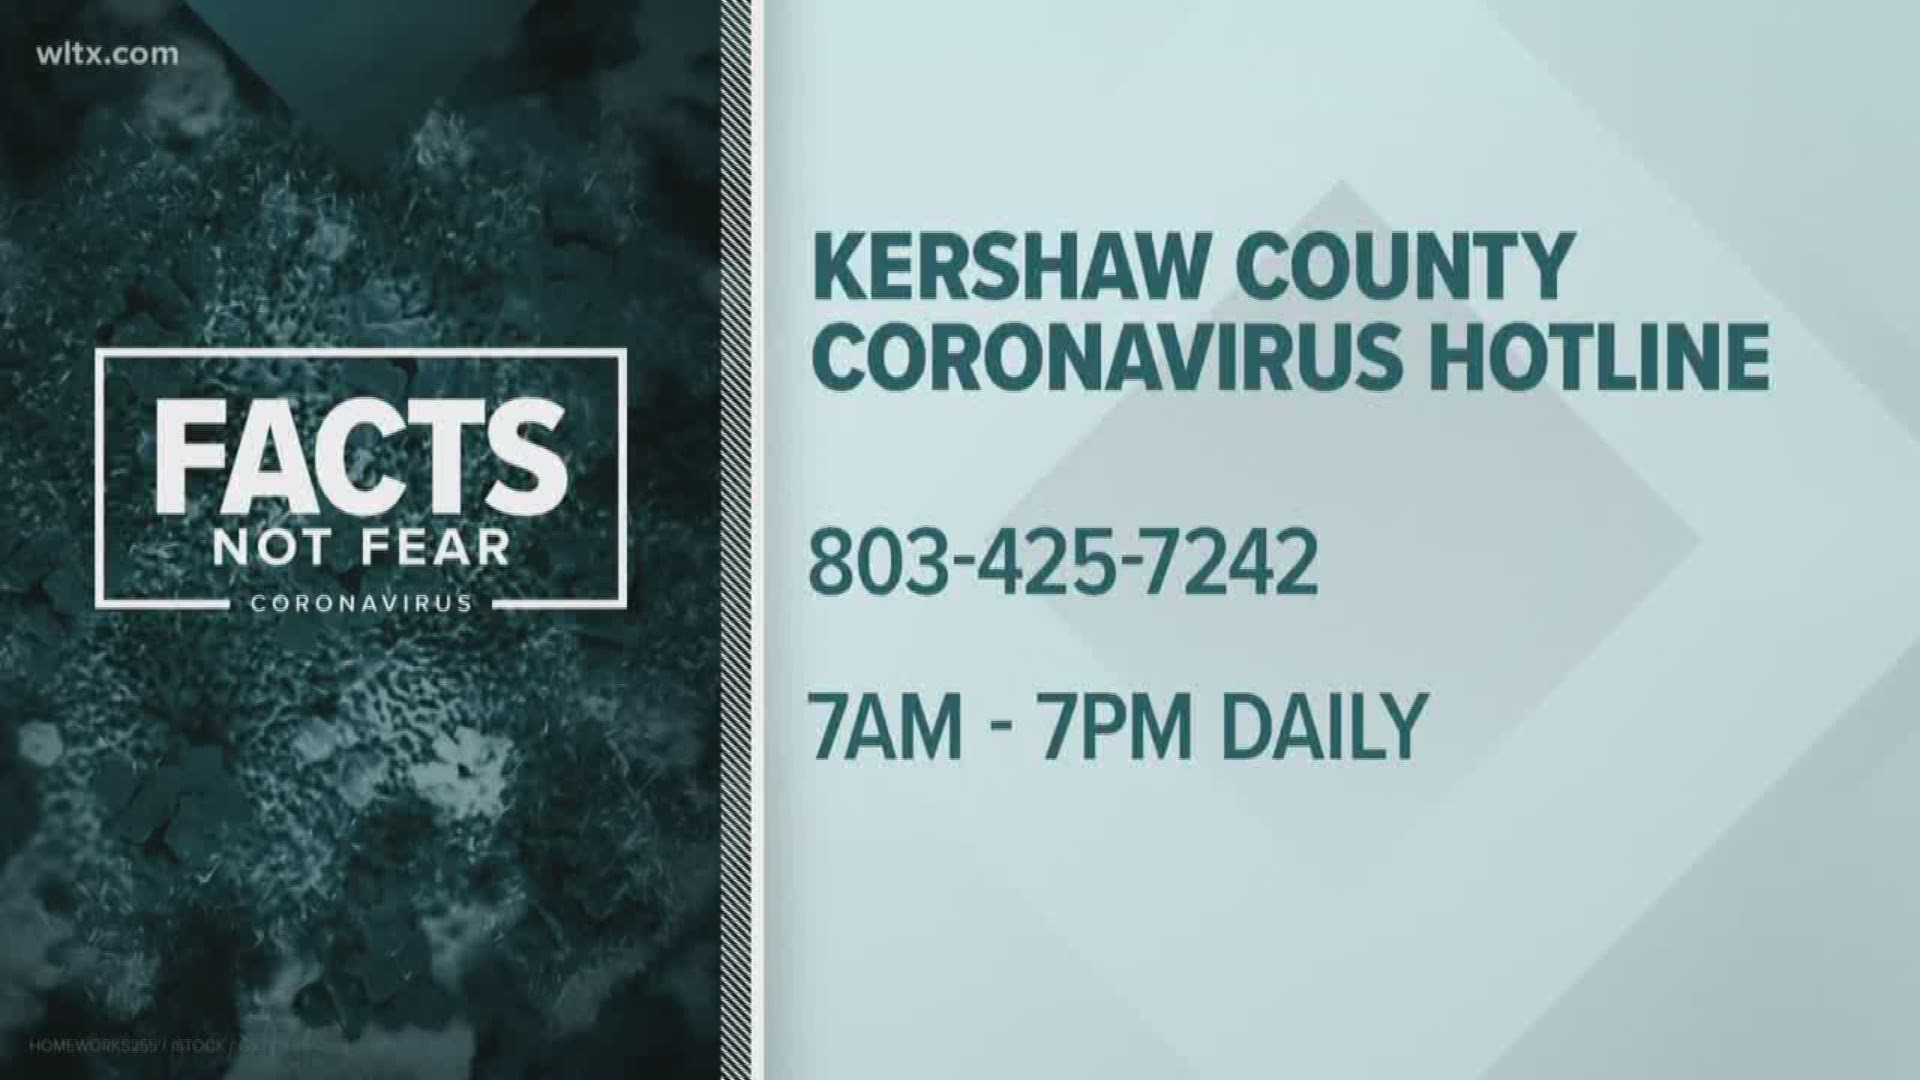 Kershaw county is the hardest hit of all of South Carolina's counties with 25 cases reported.